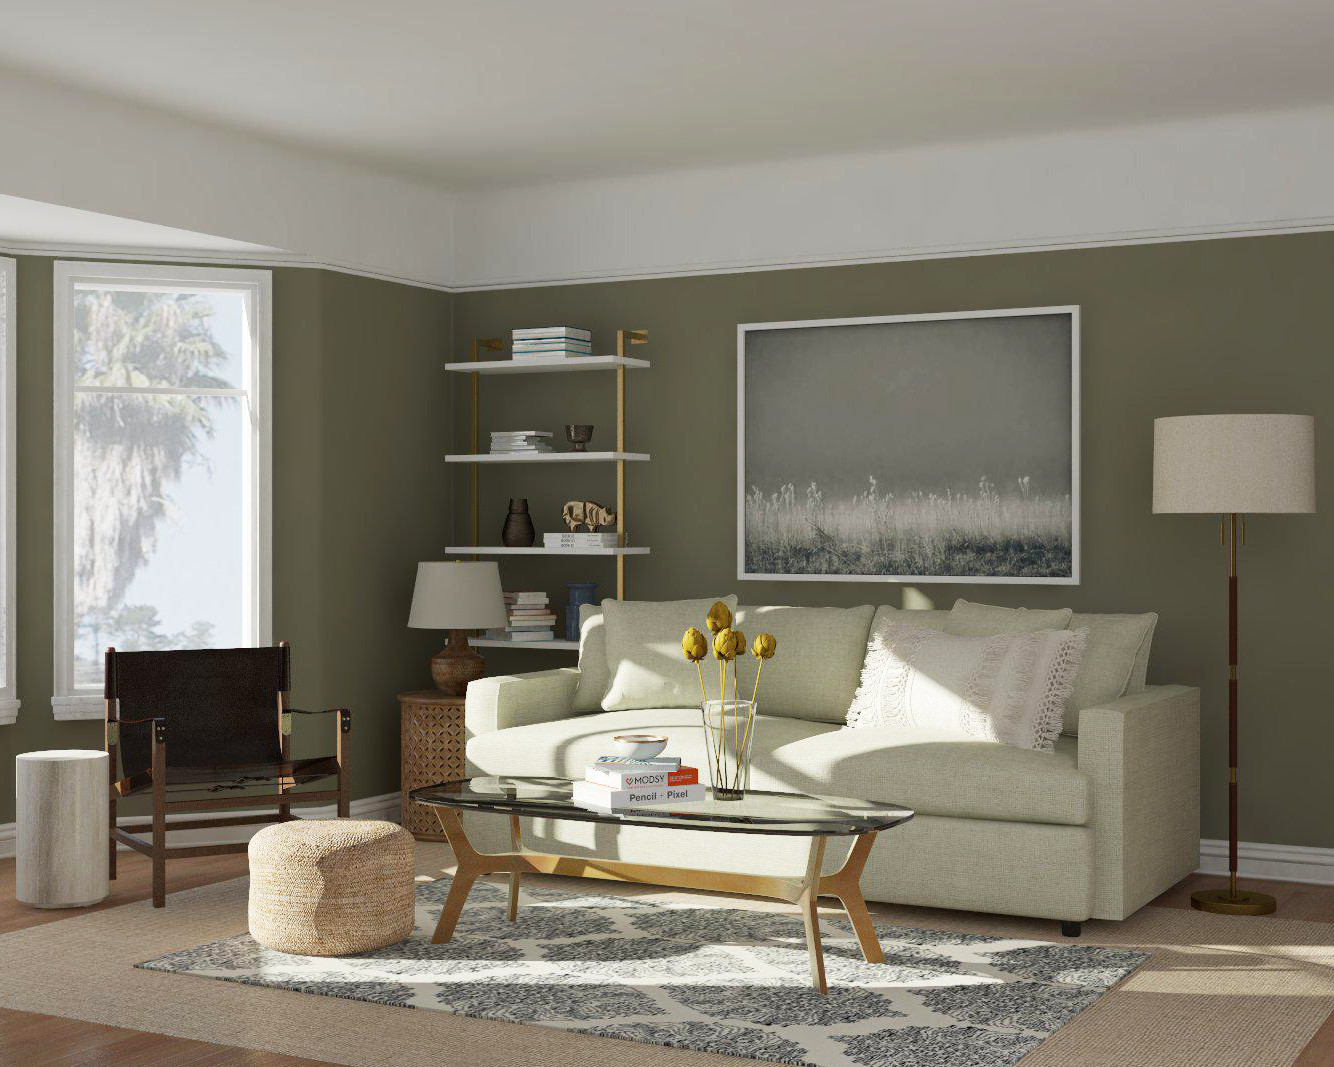 Living Room Wall Colors Idea
 Transform Any Space With These Paint Color Ideas